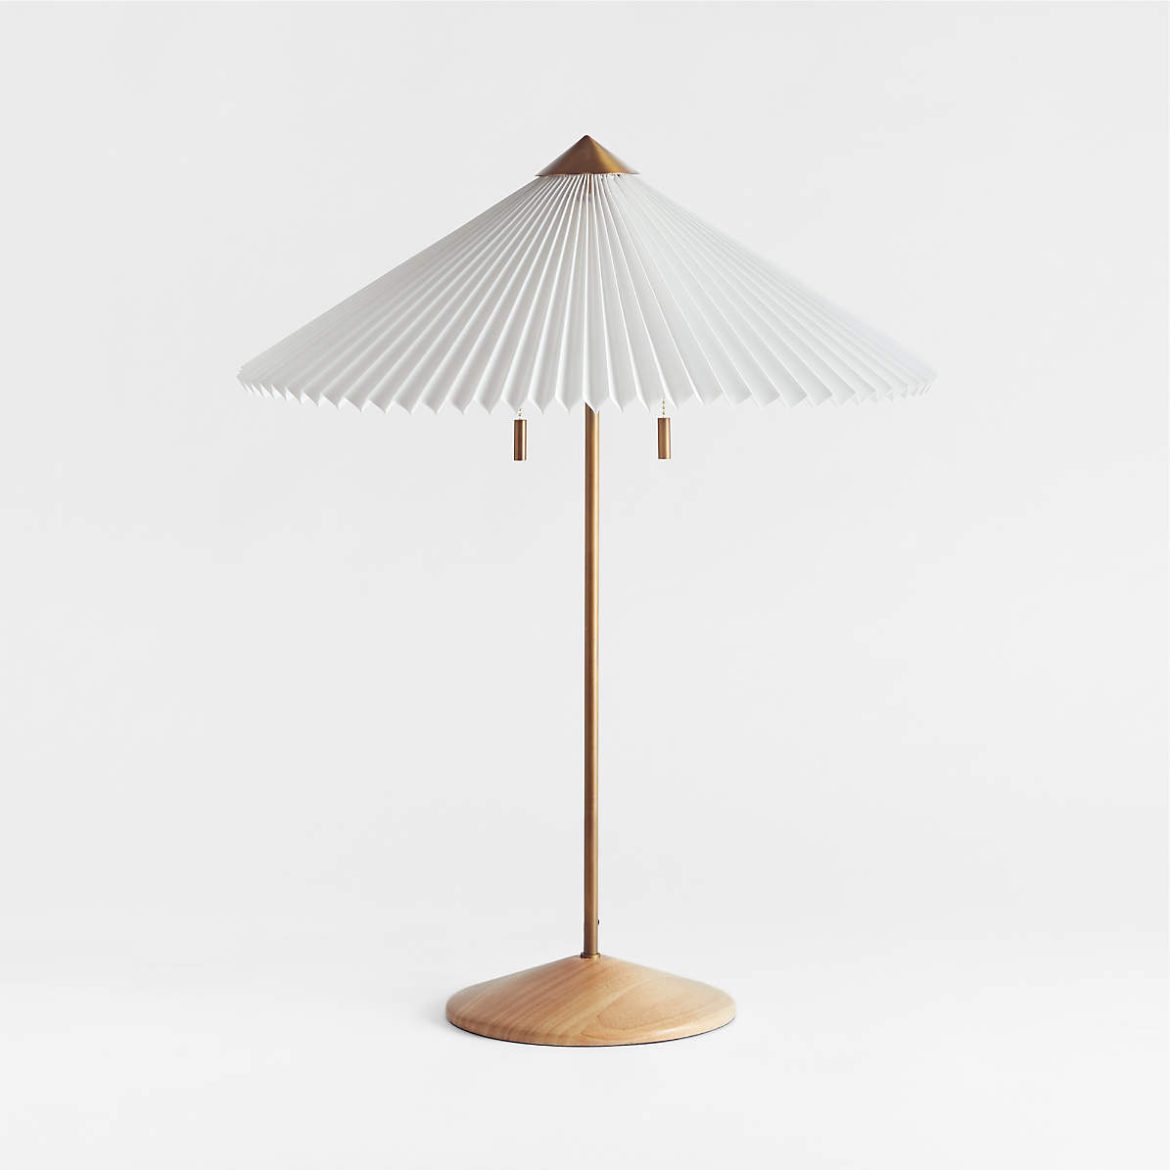 Add Style to Your Home With a Table Lamp